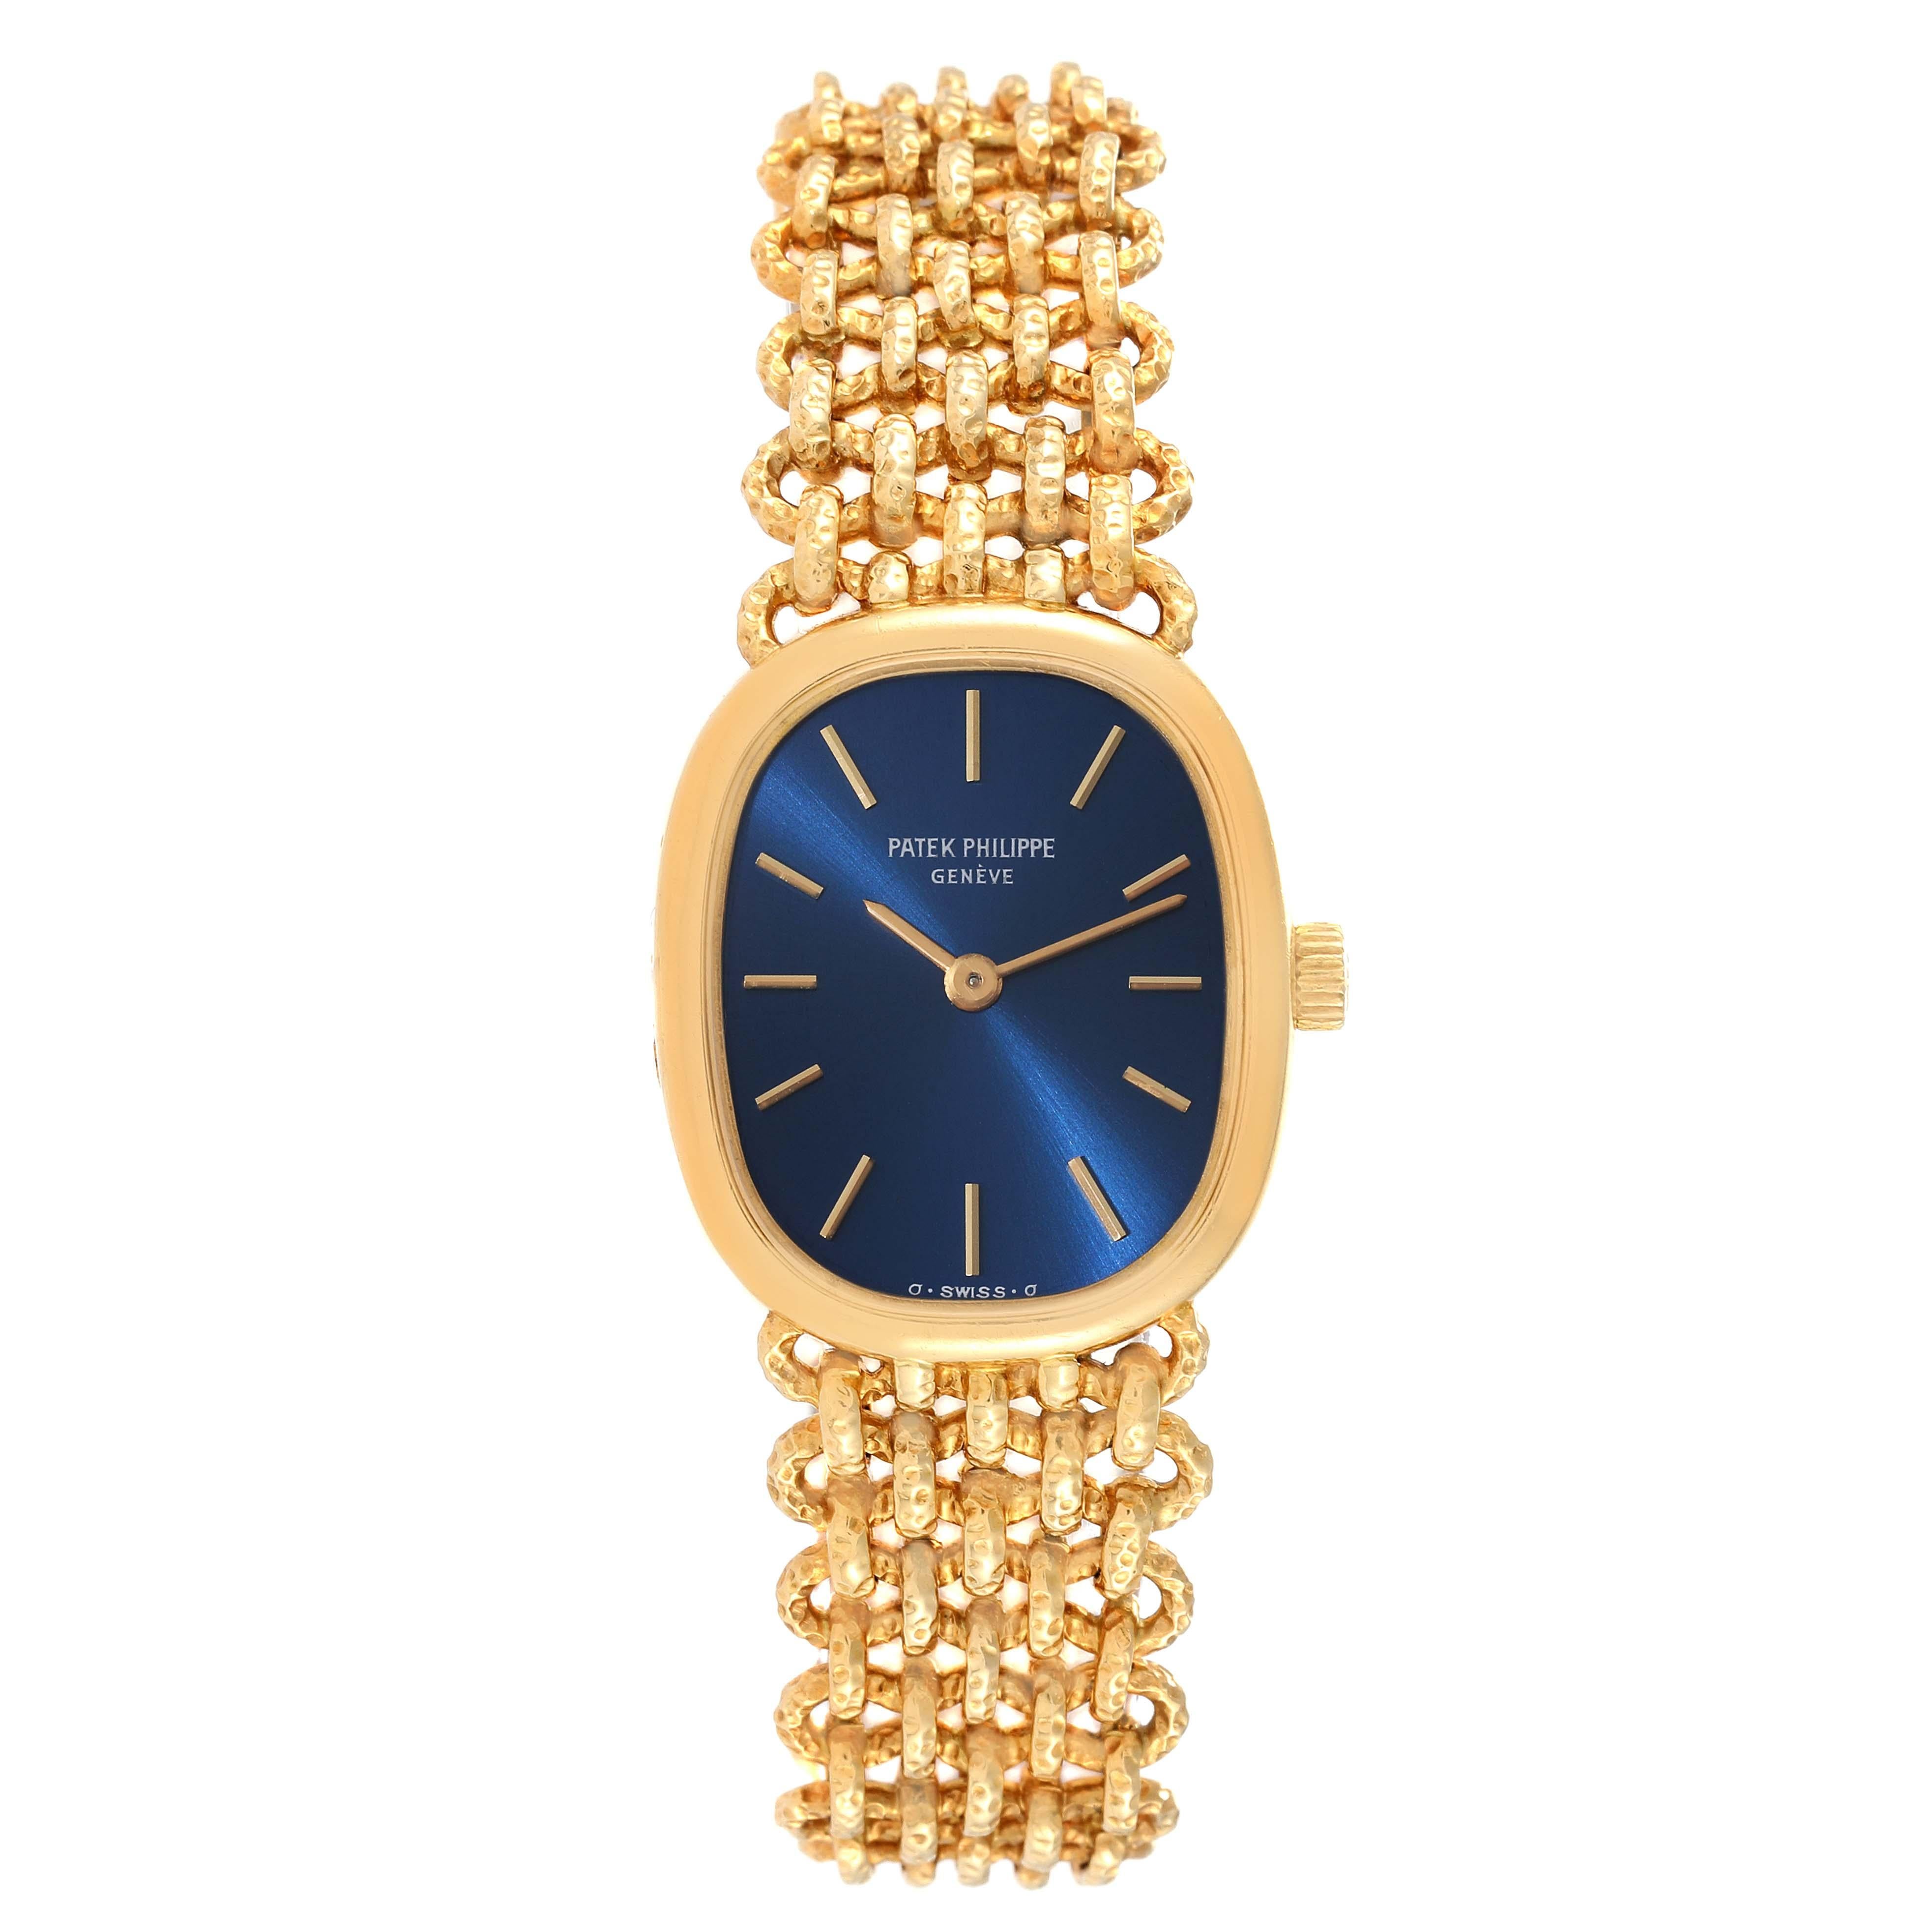 Patek Philippe Golden Ellipse 18k Yellow Gold Blue Dial Ladies Watch 4464. Quartz movement. 18k yellow gold case 24 mm x 20 mm. Thickness. 5 mm. 18k yellow gold bezel. Scratch resistant sapphire crystal. Blue satin dial with raised baton hour